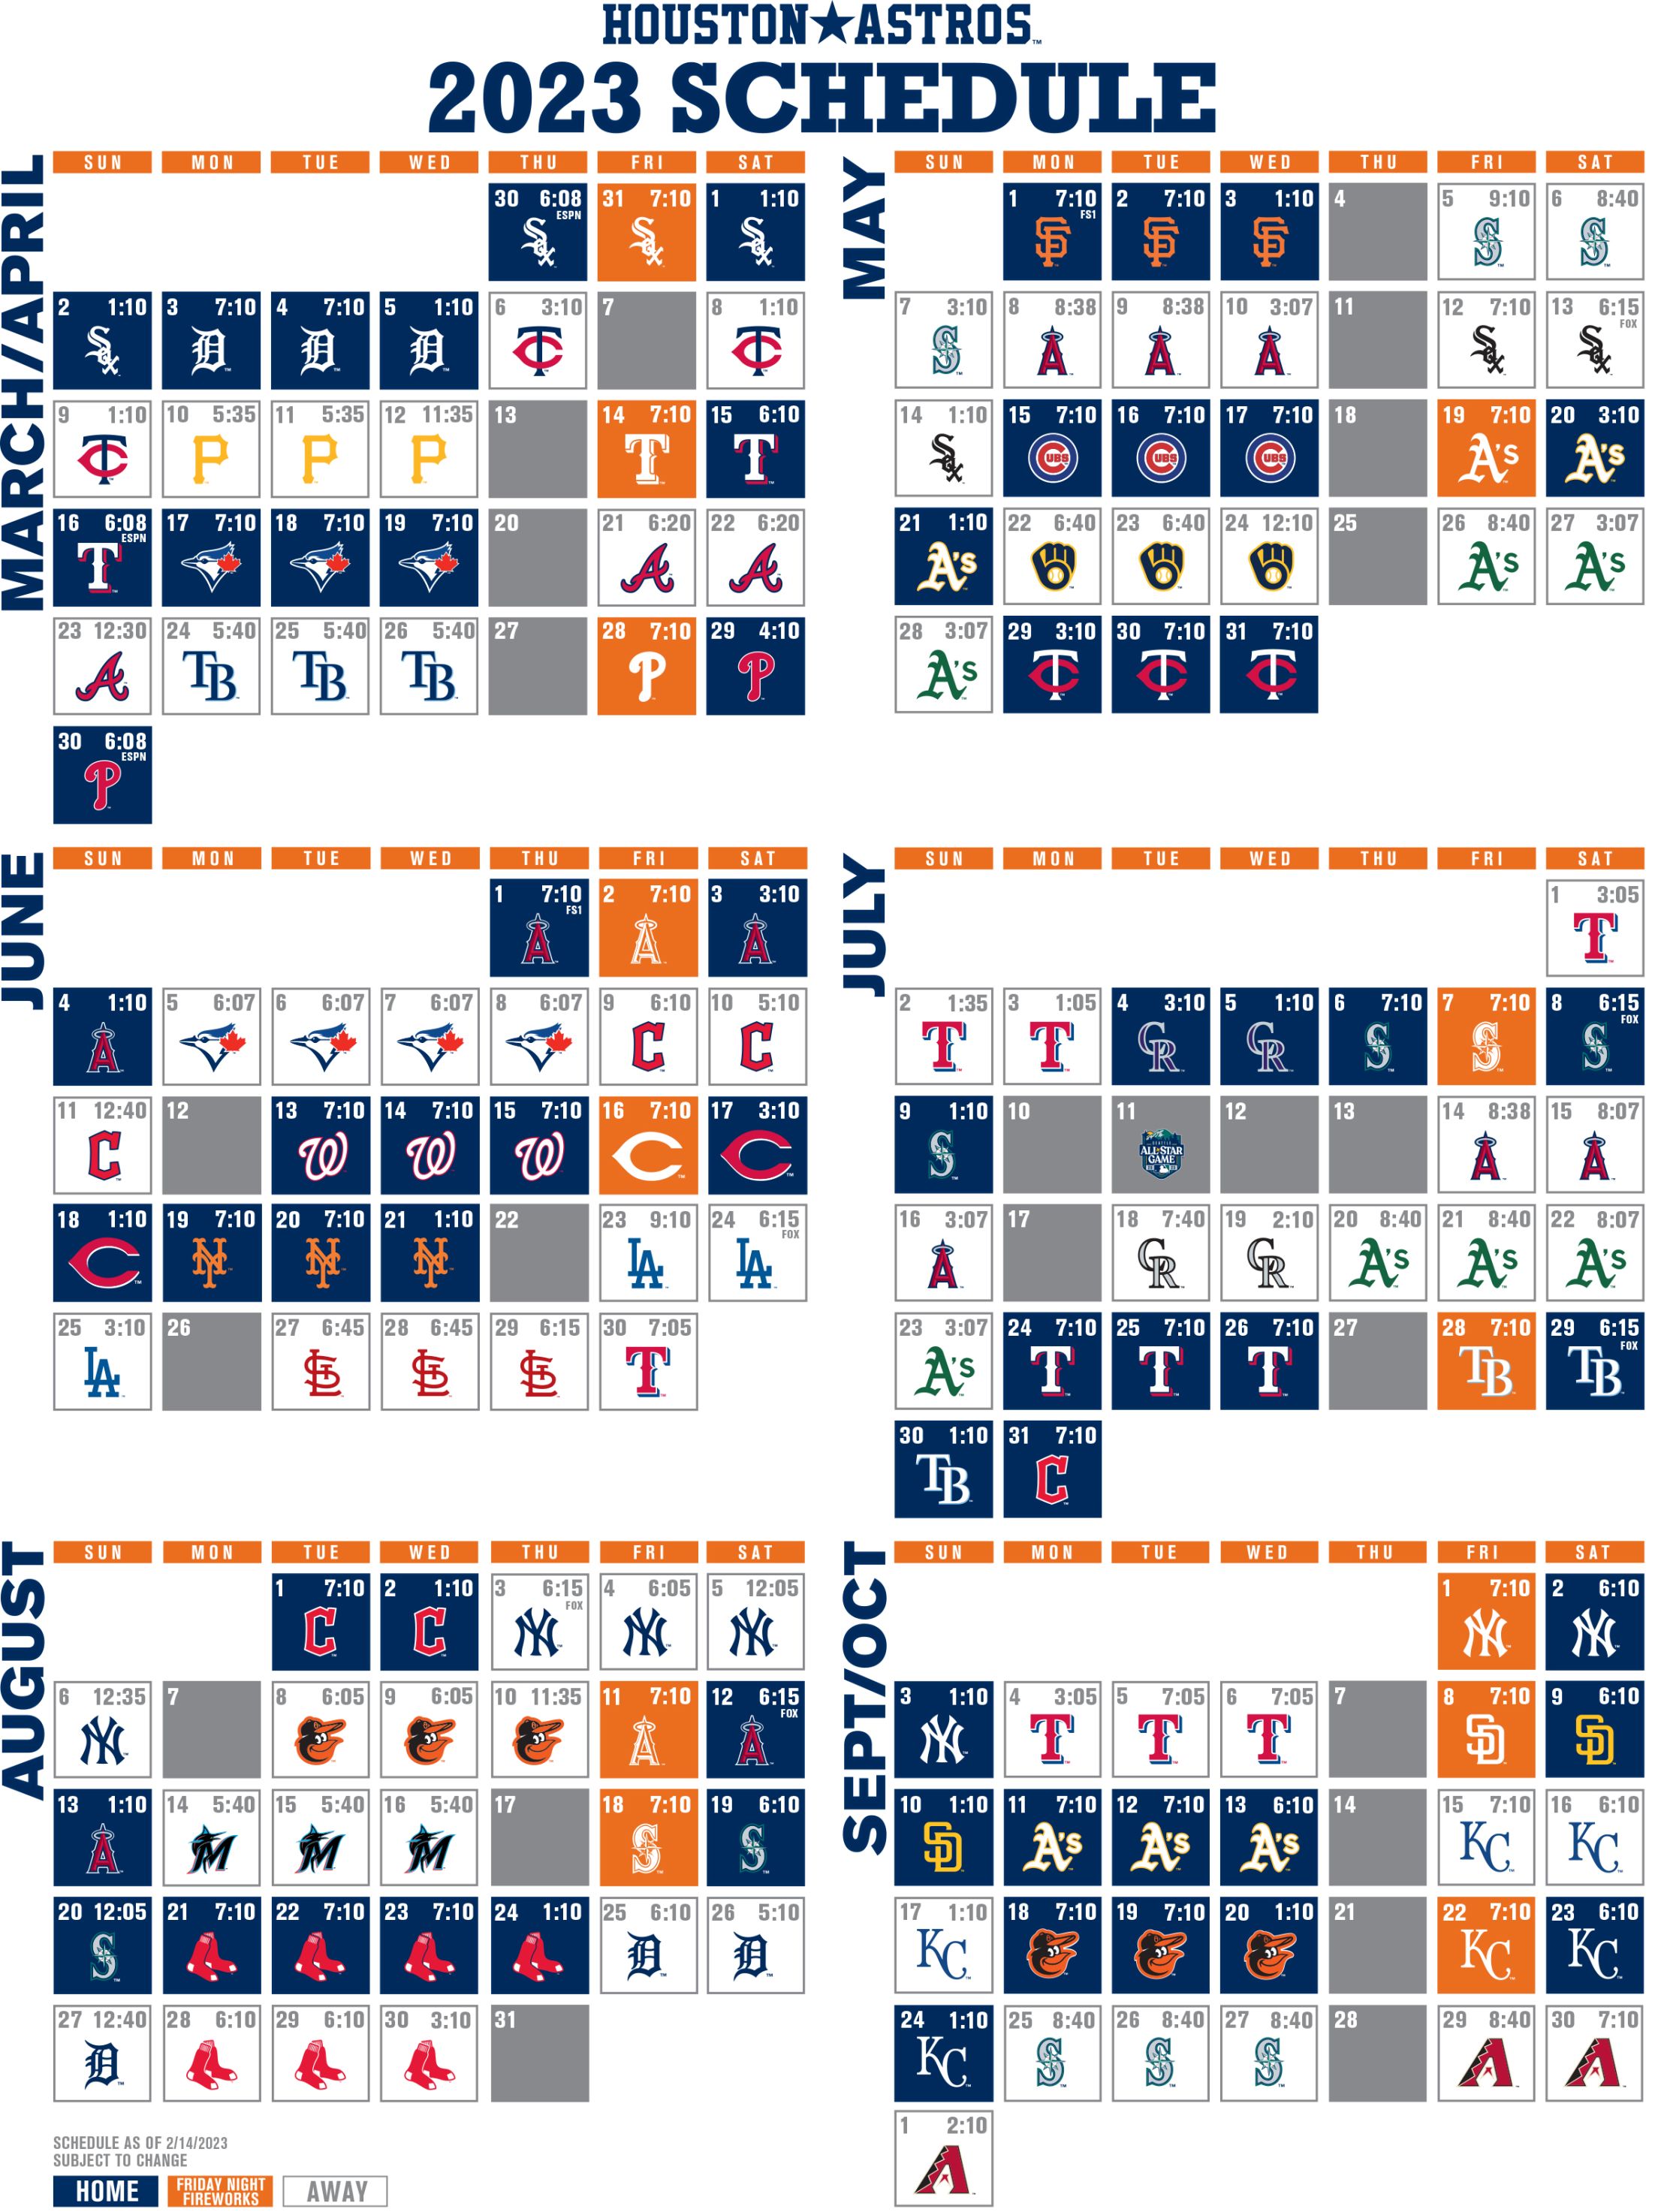 Houston Astros on Twitter  Our 2017 schedule has been released  Our  home opener is April 3 against the Mariners httpstcoiIcZ8Gyd8w  httpstcoUhTsS36FwV  Twitter